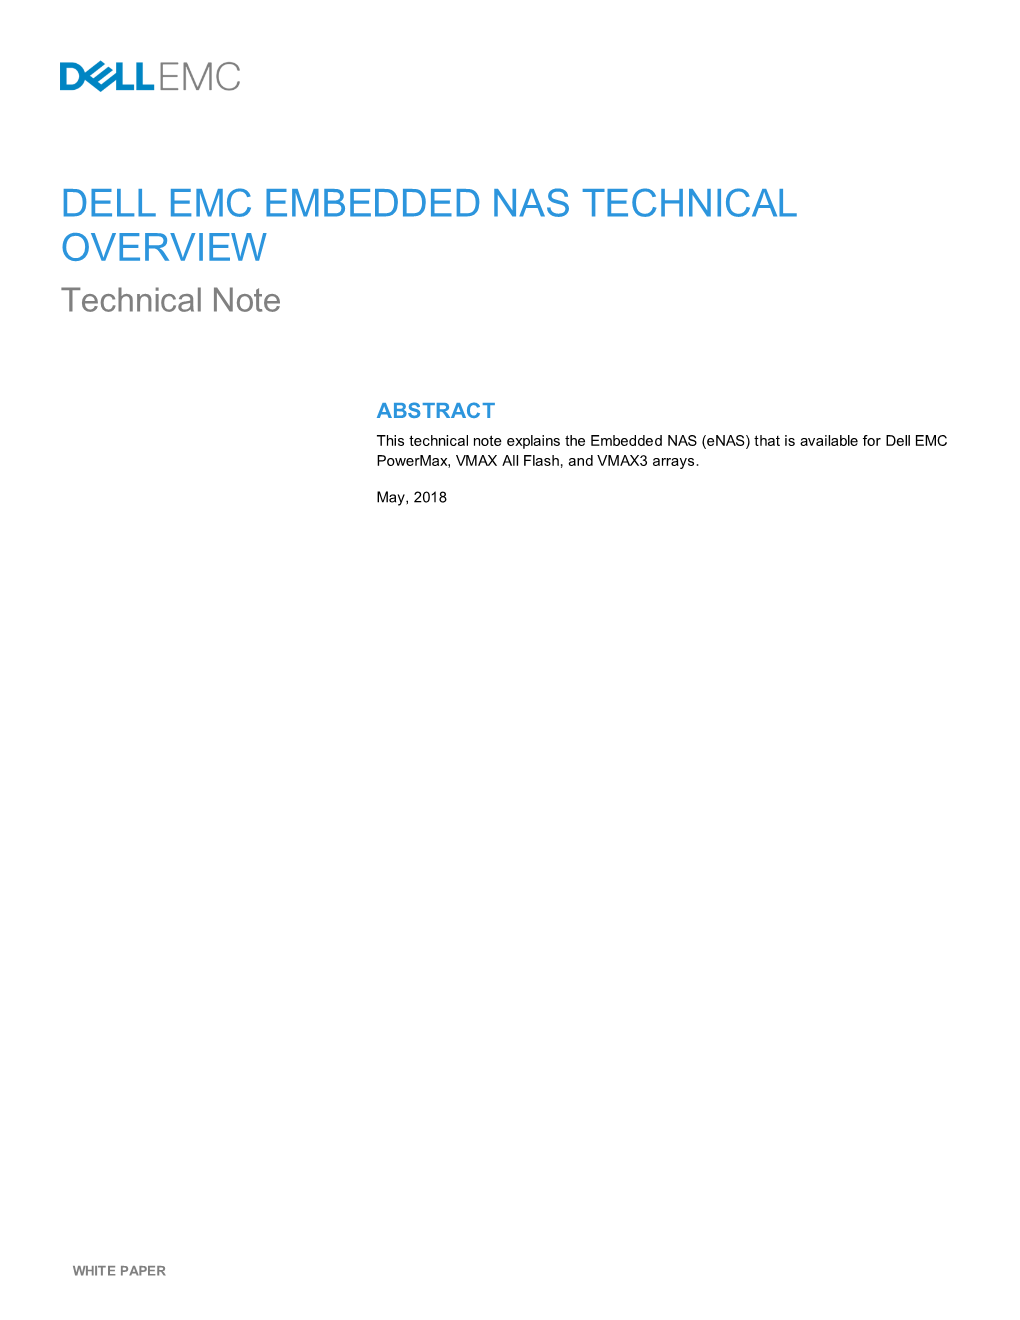 Dell EMC VMAX Embedded NAS Technical Overview